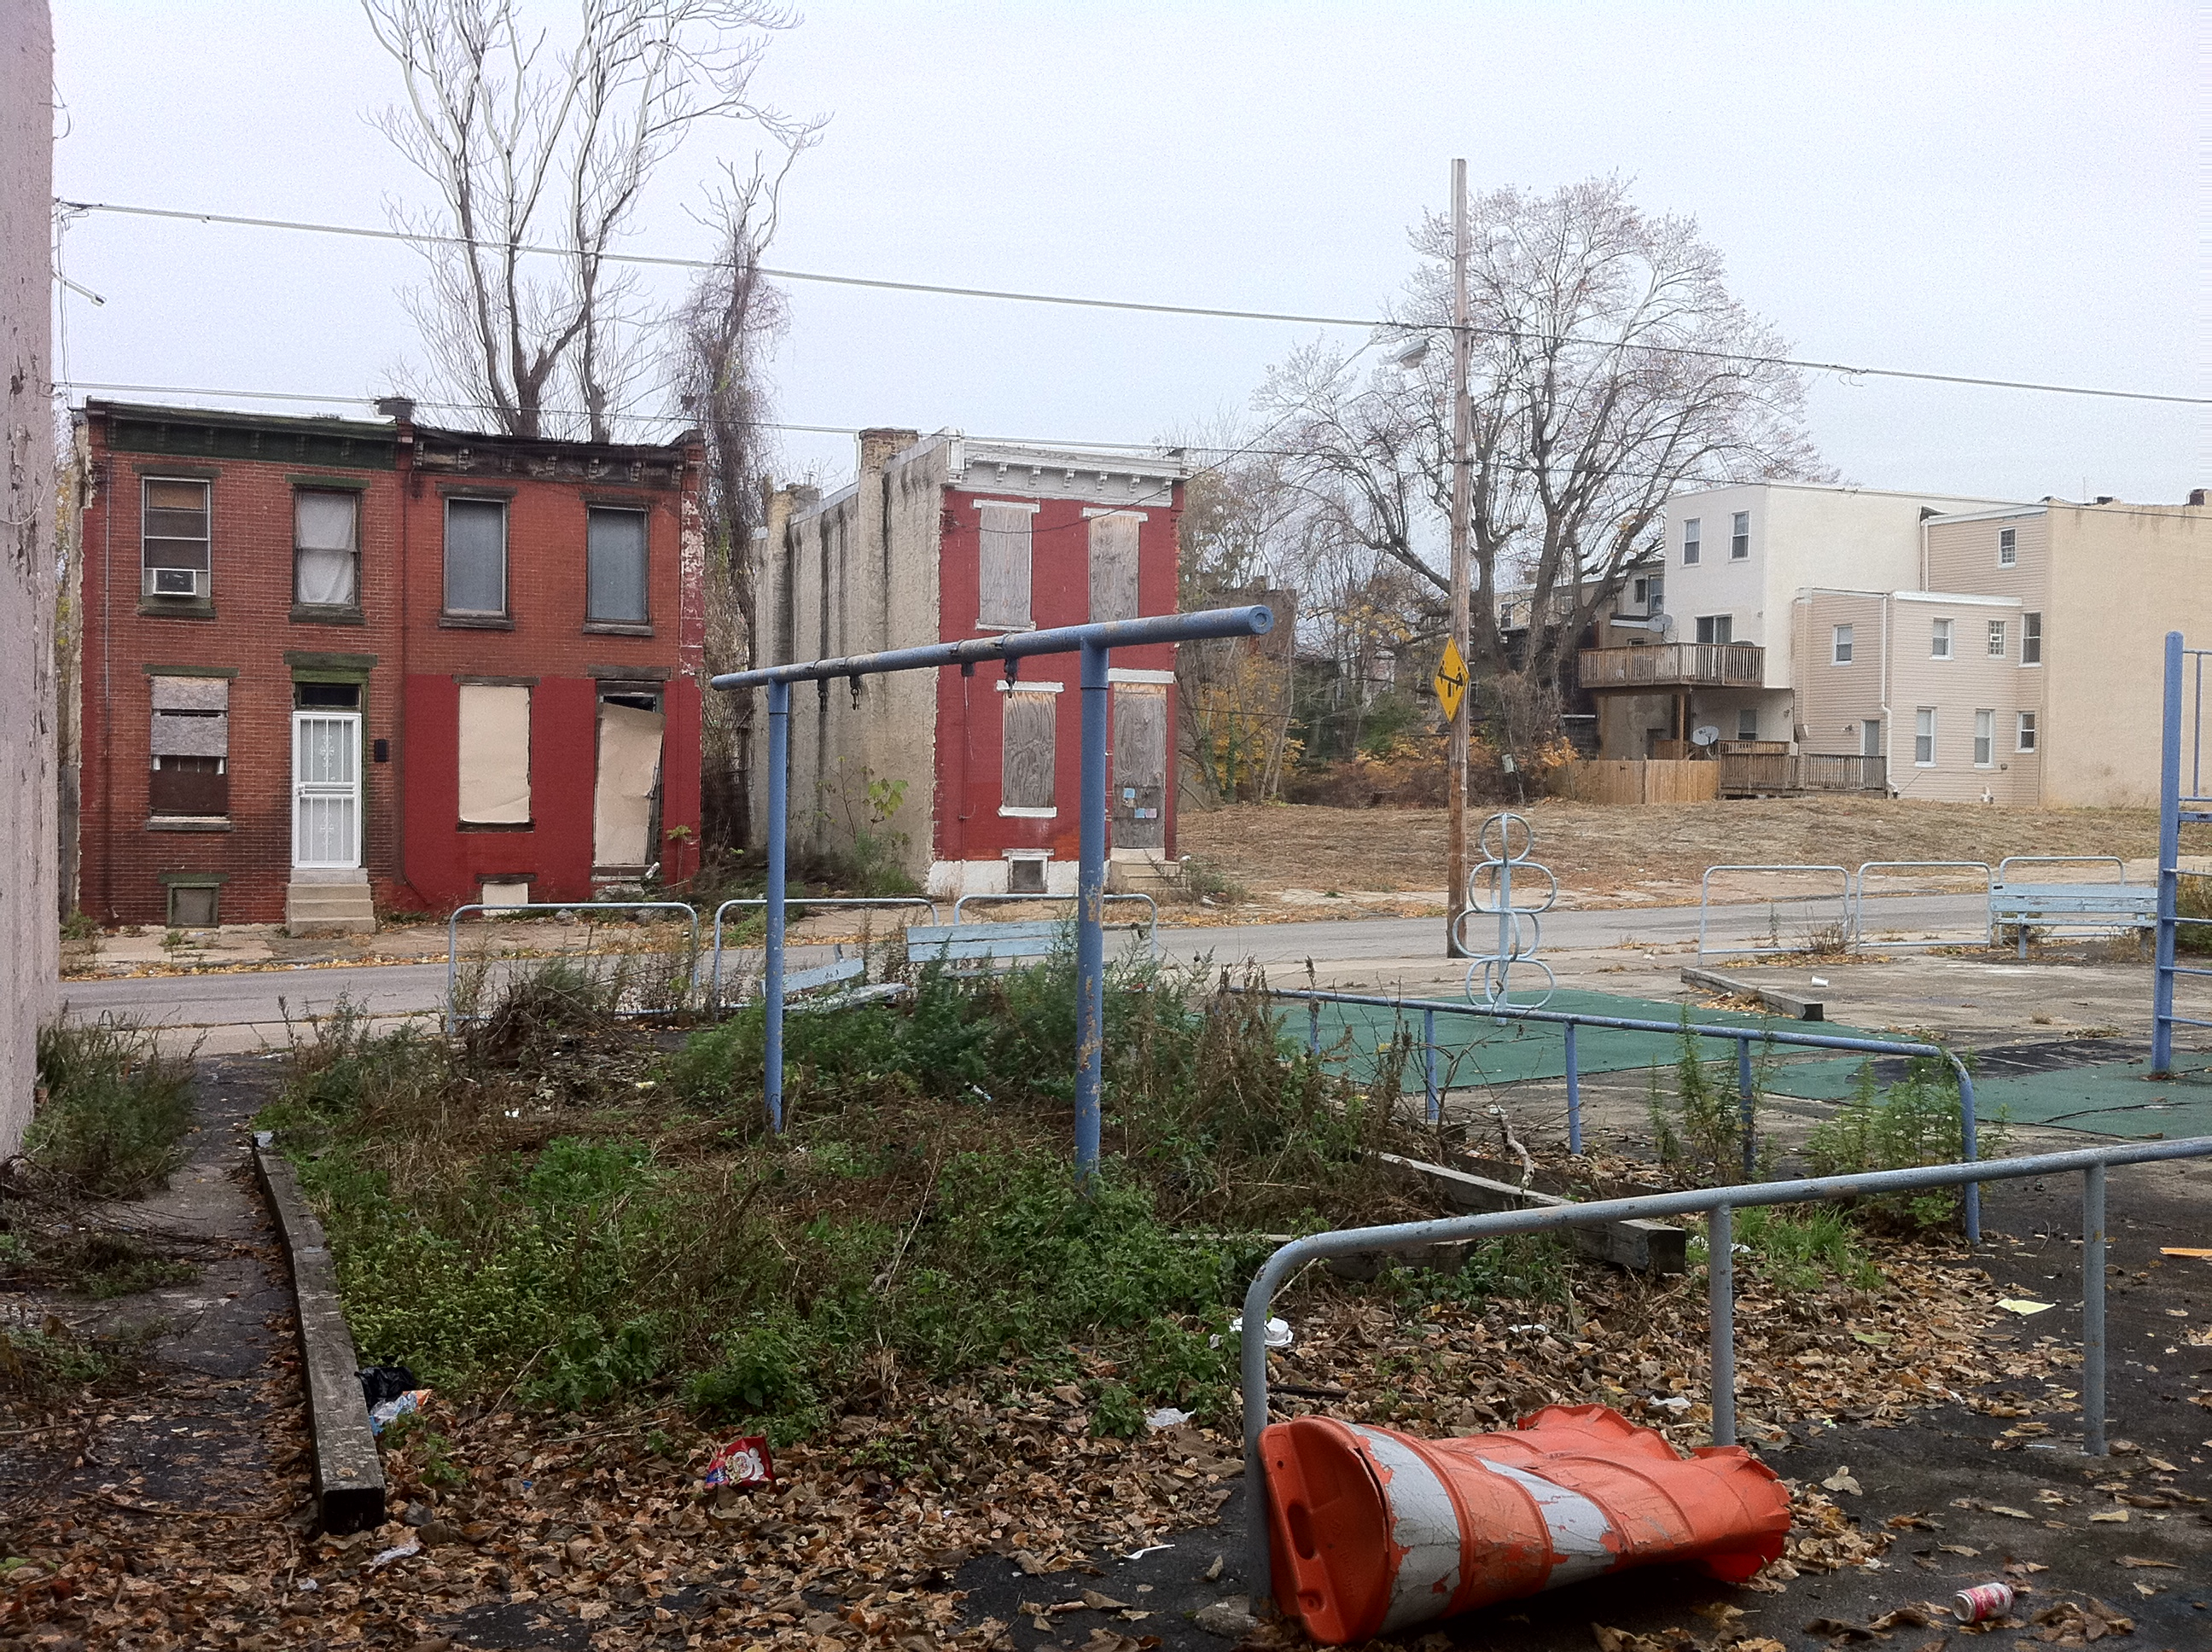 By the summer of 2015, the playground at 37th and Mt. Vernon streets could be completely overhauled. Photo courtesy of The Trust for Public Land